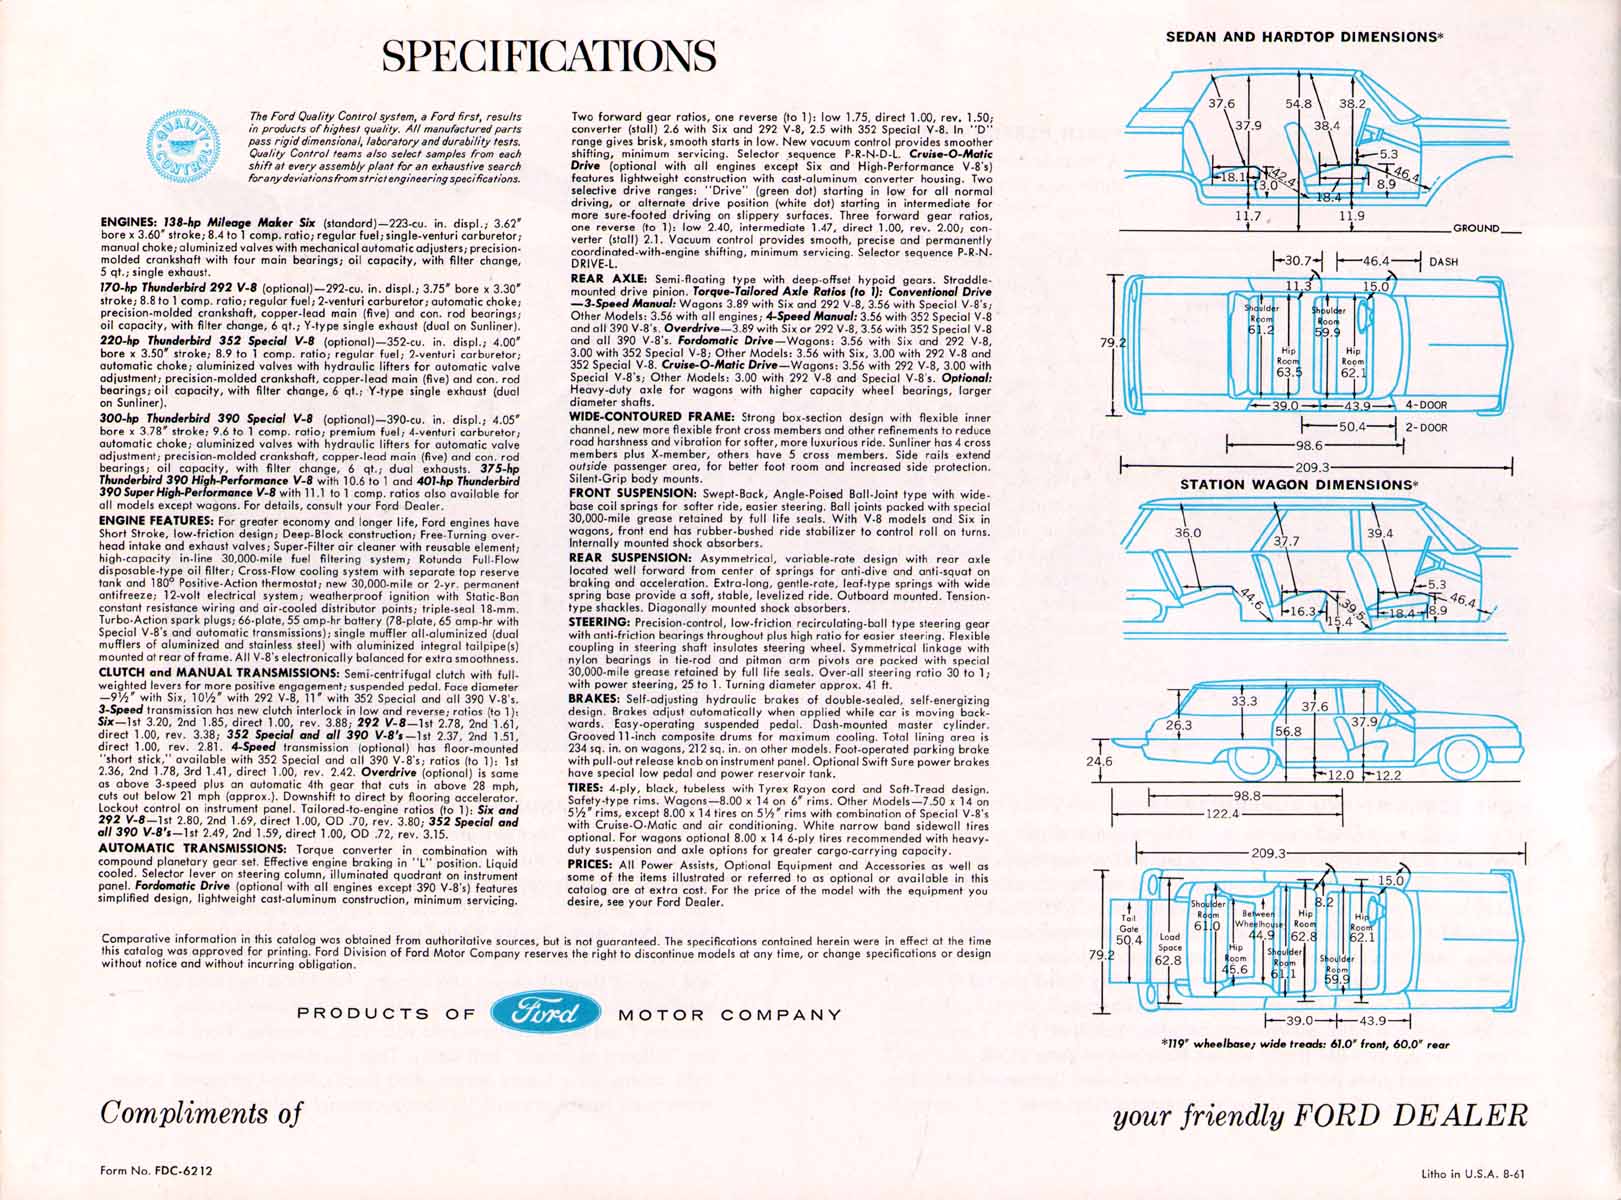 1962 Ford Full-Size Brochure Page 9